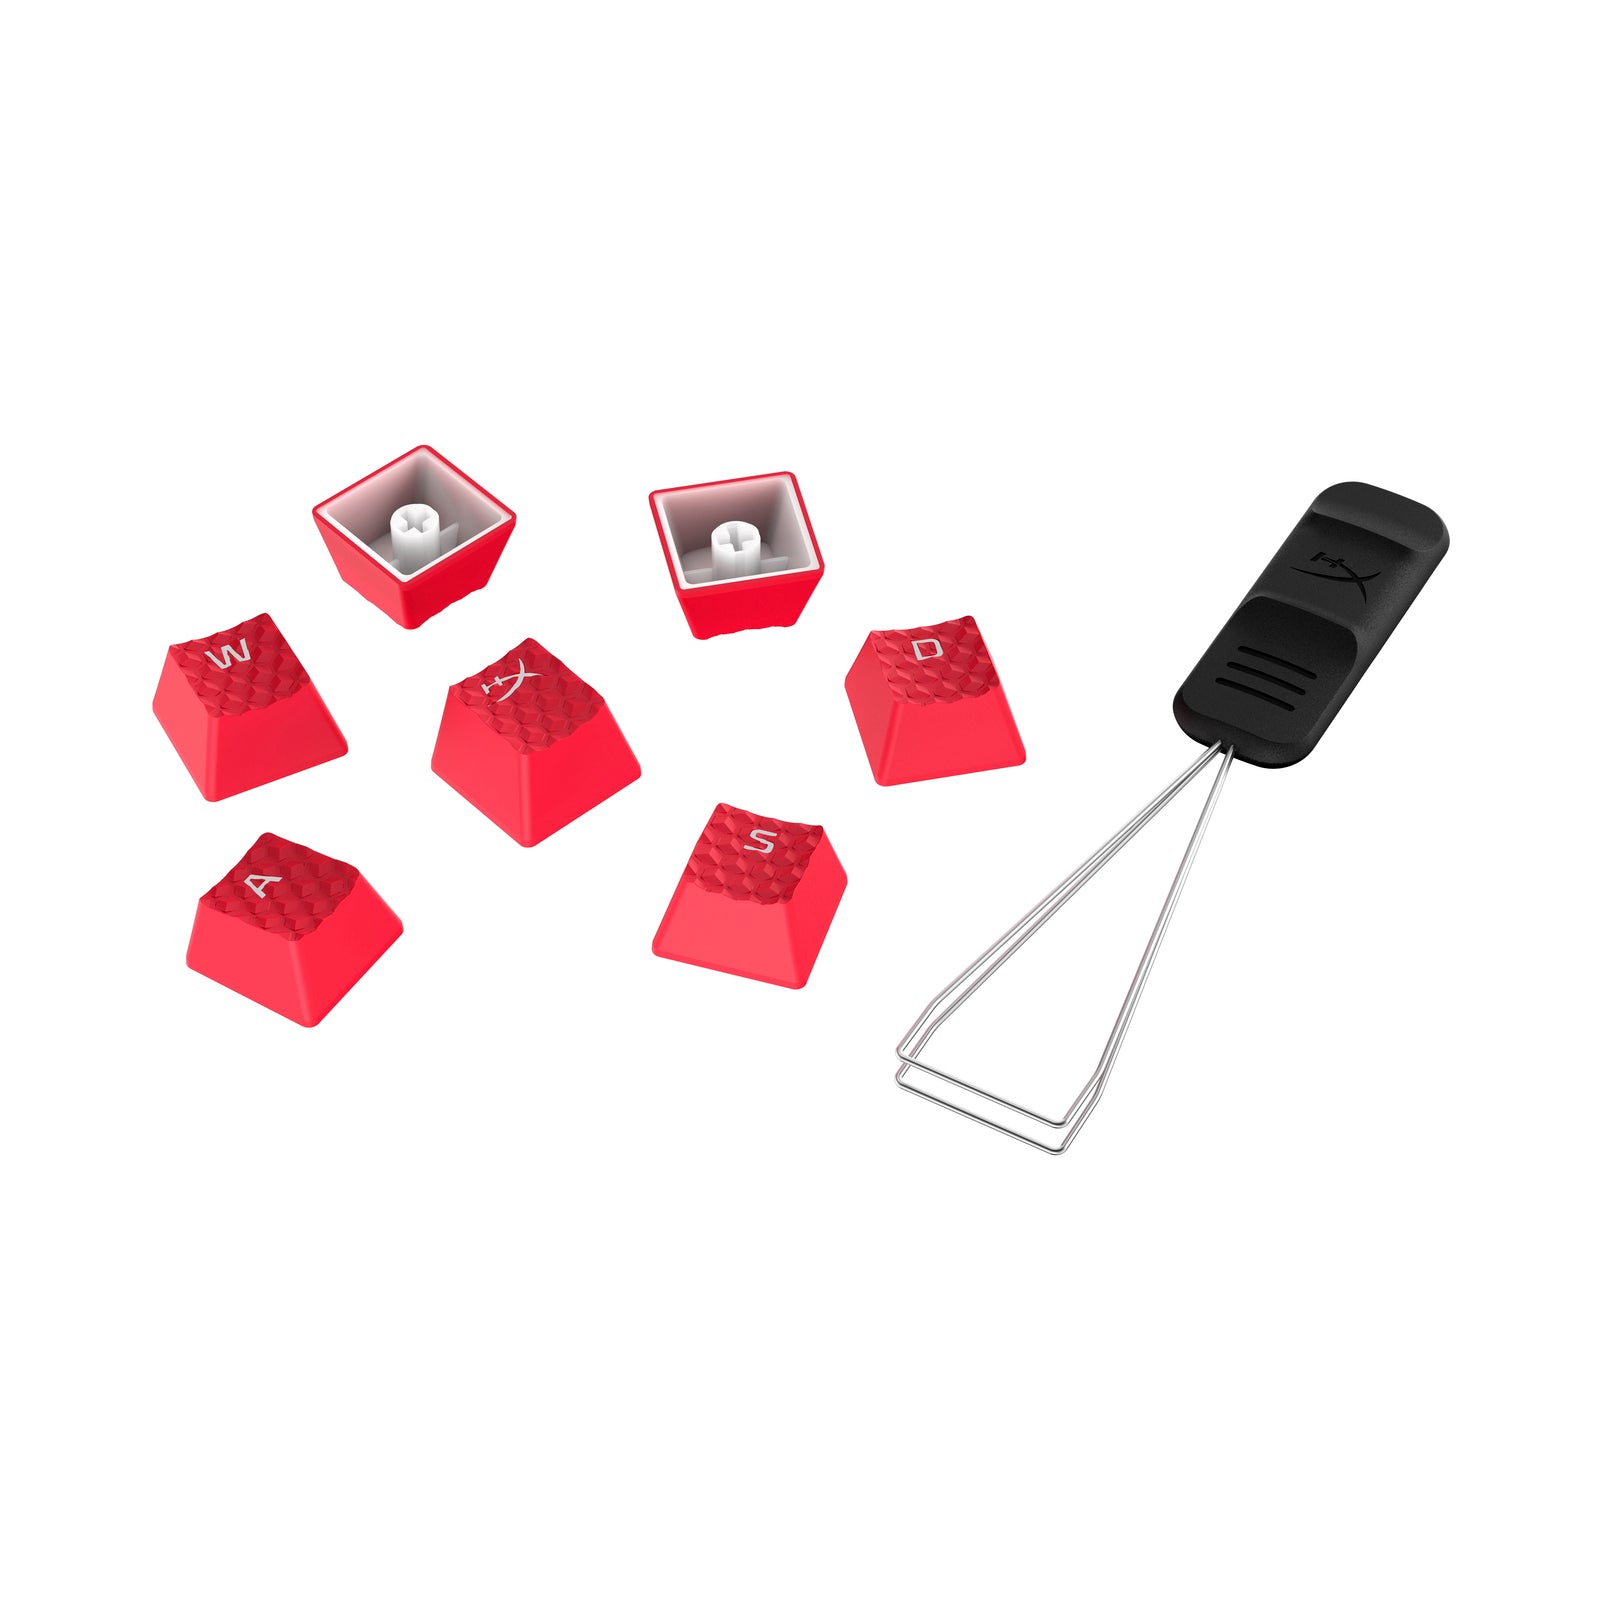 scattered view of HyperX rubber keycaps in red with keycap removal tool